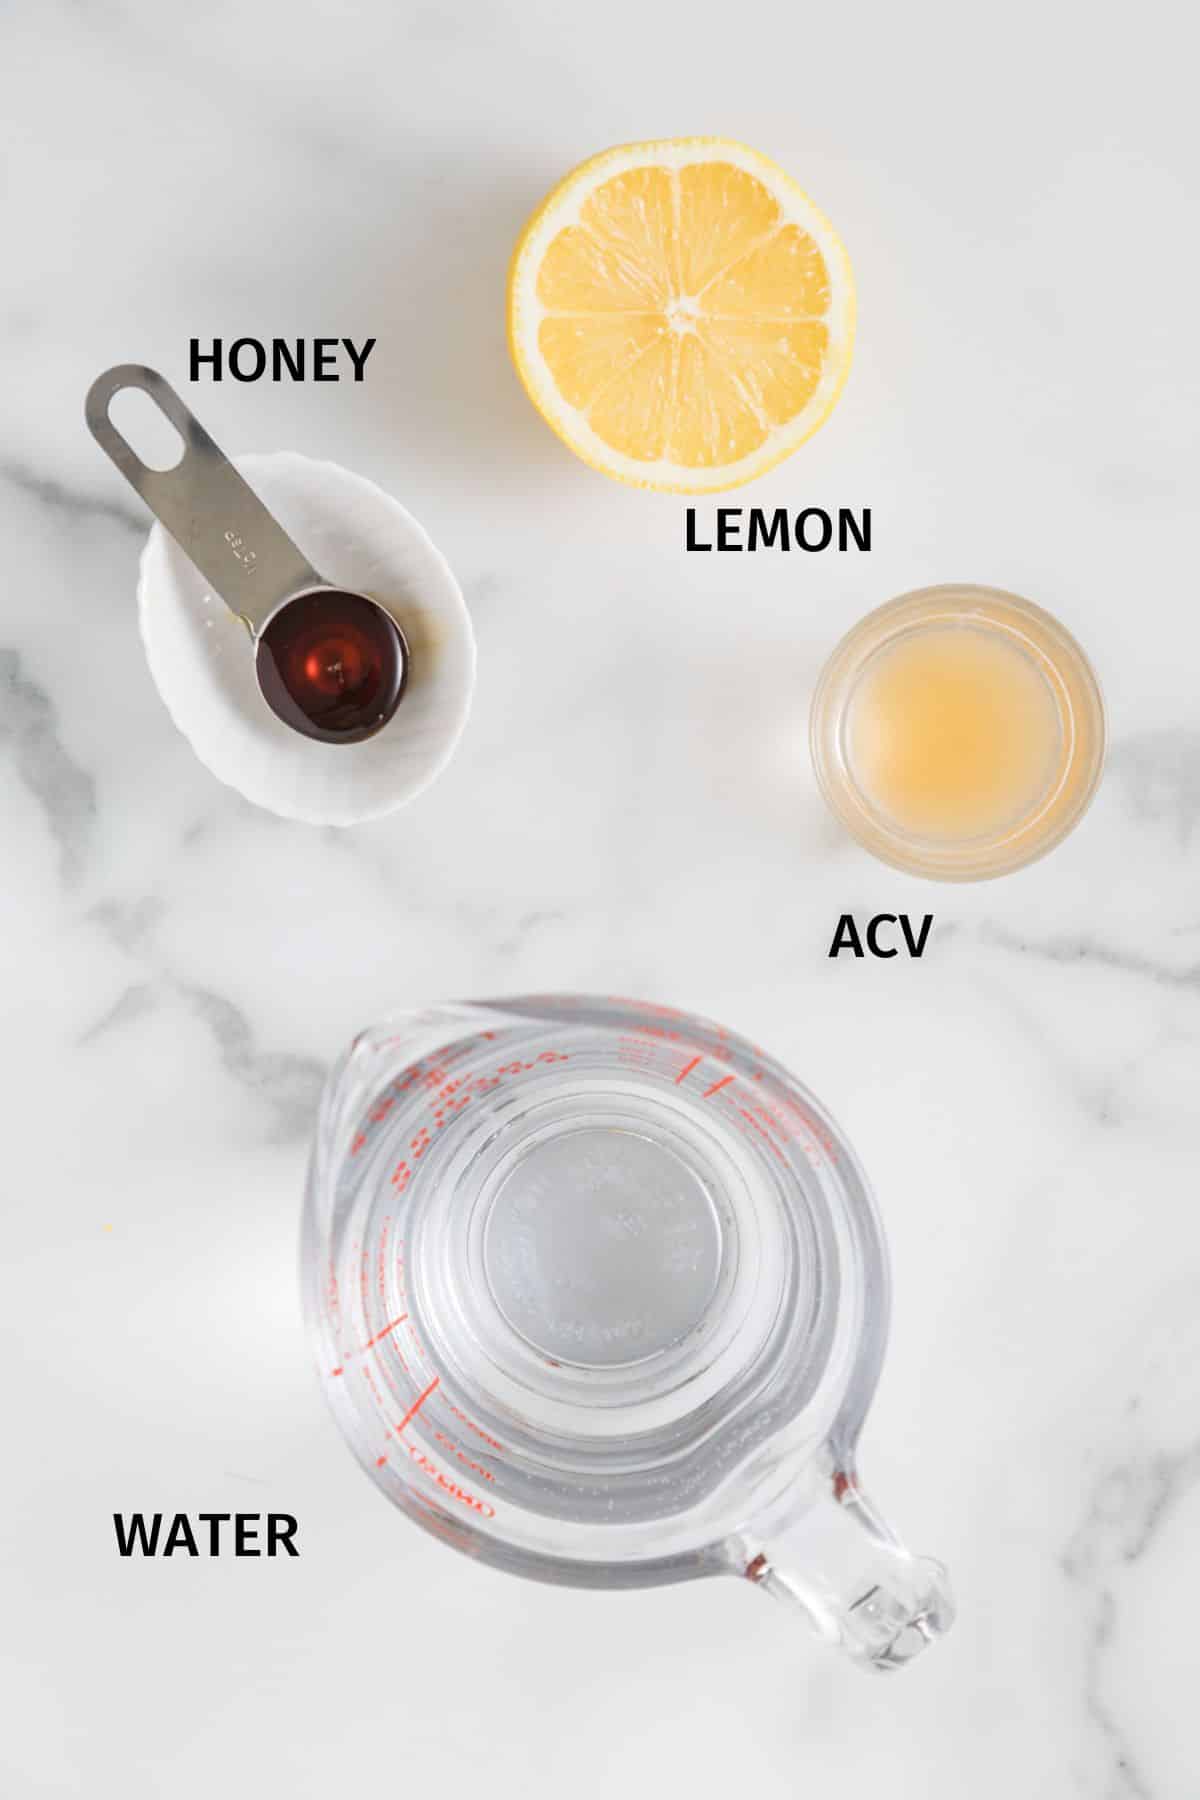 Ingredients to make a healthy ACV drink on a white surface.